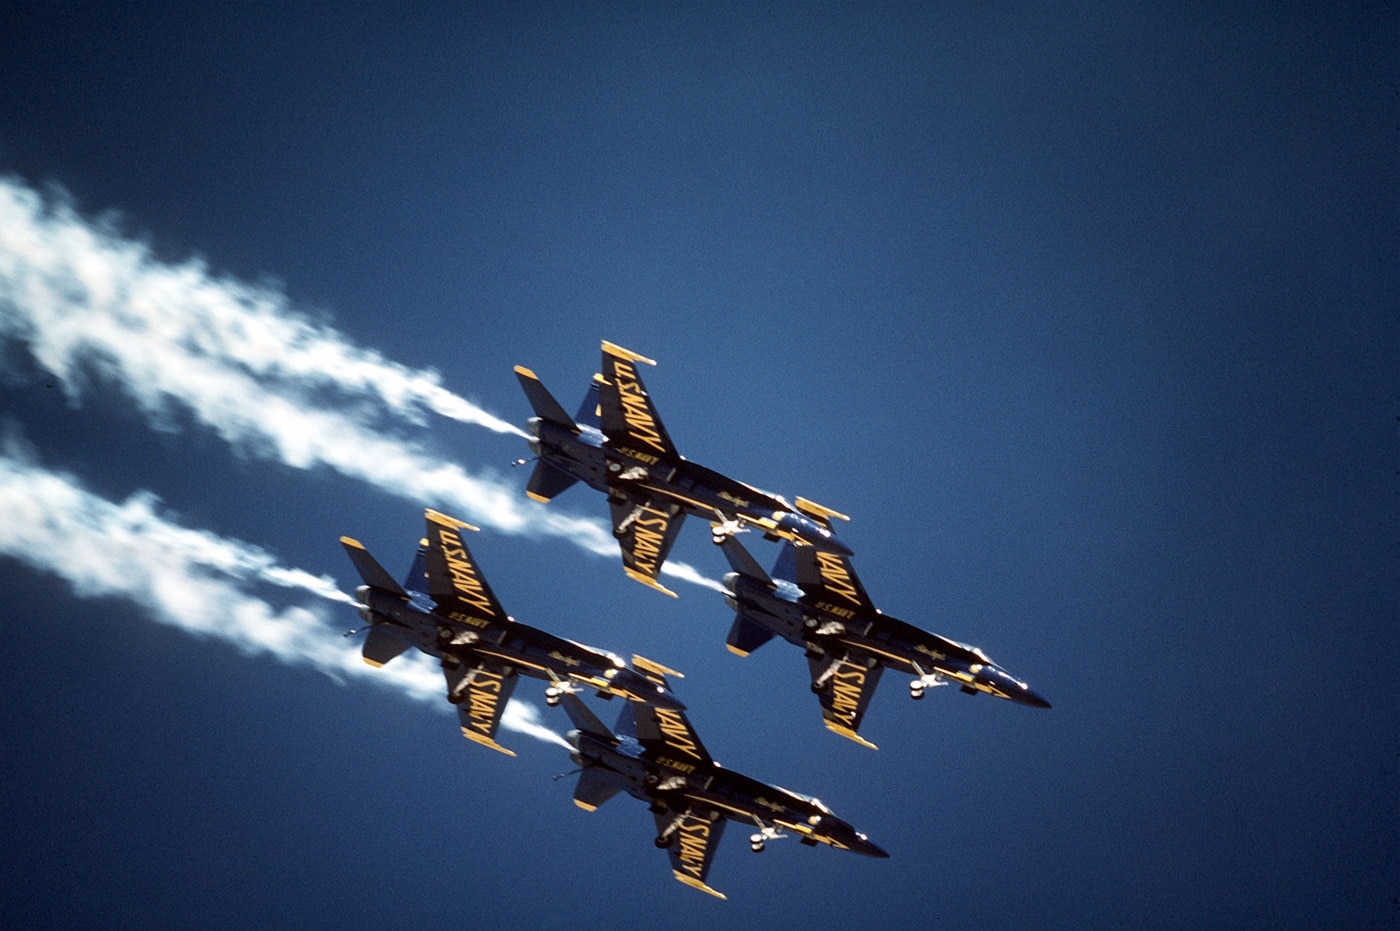 Blue Angels flying F-18 fighters during training in 1987